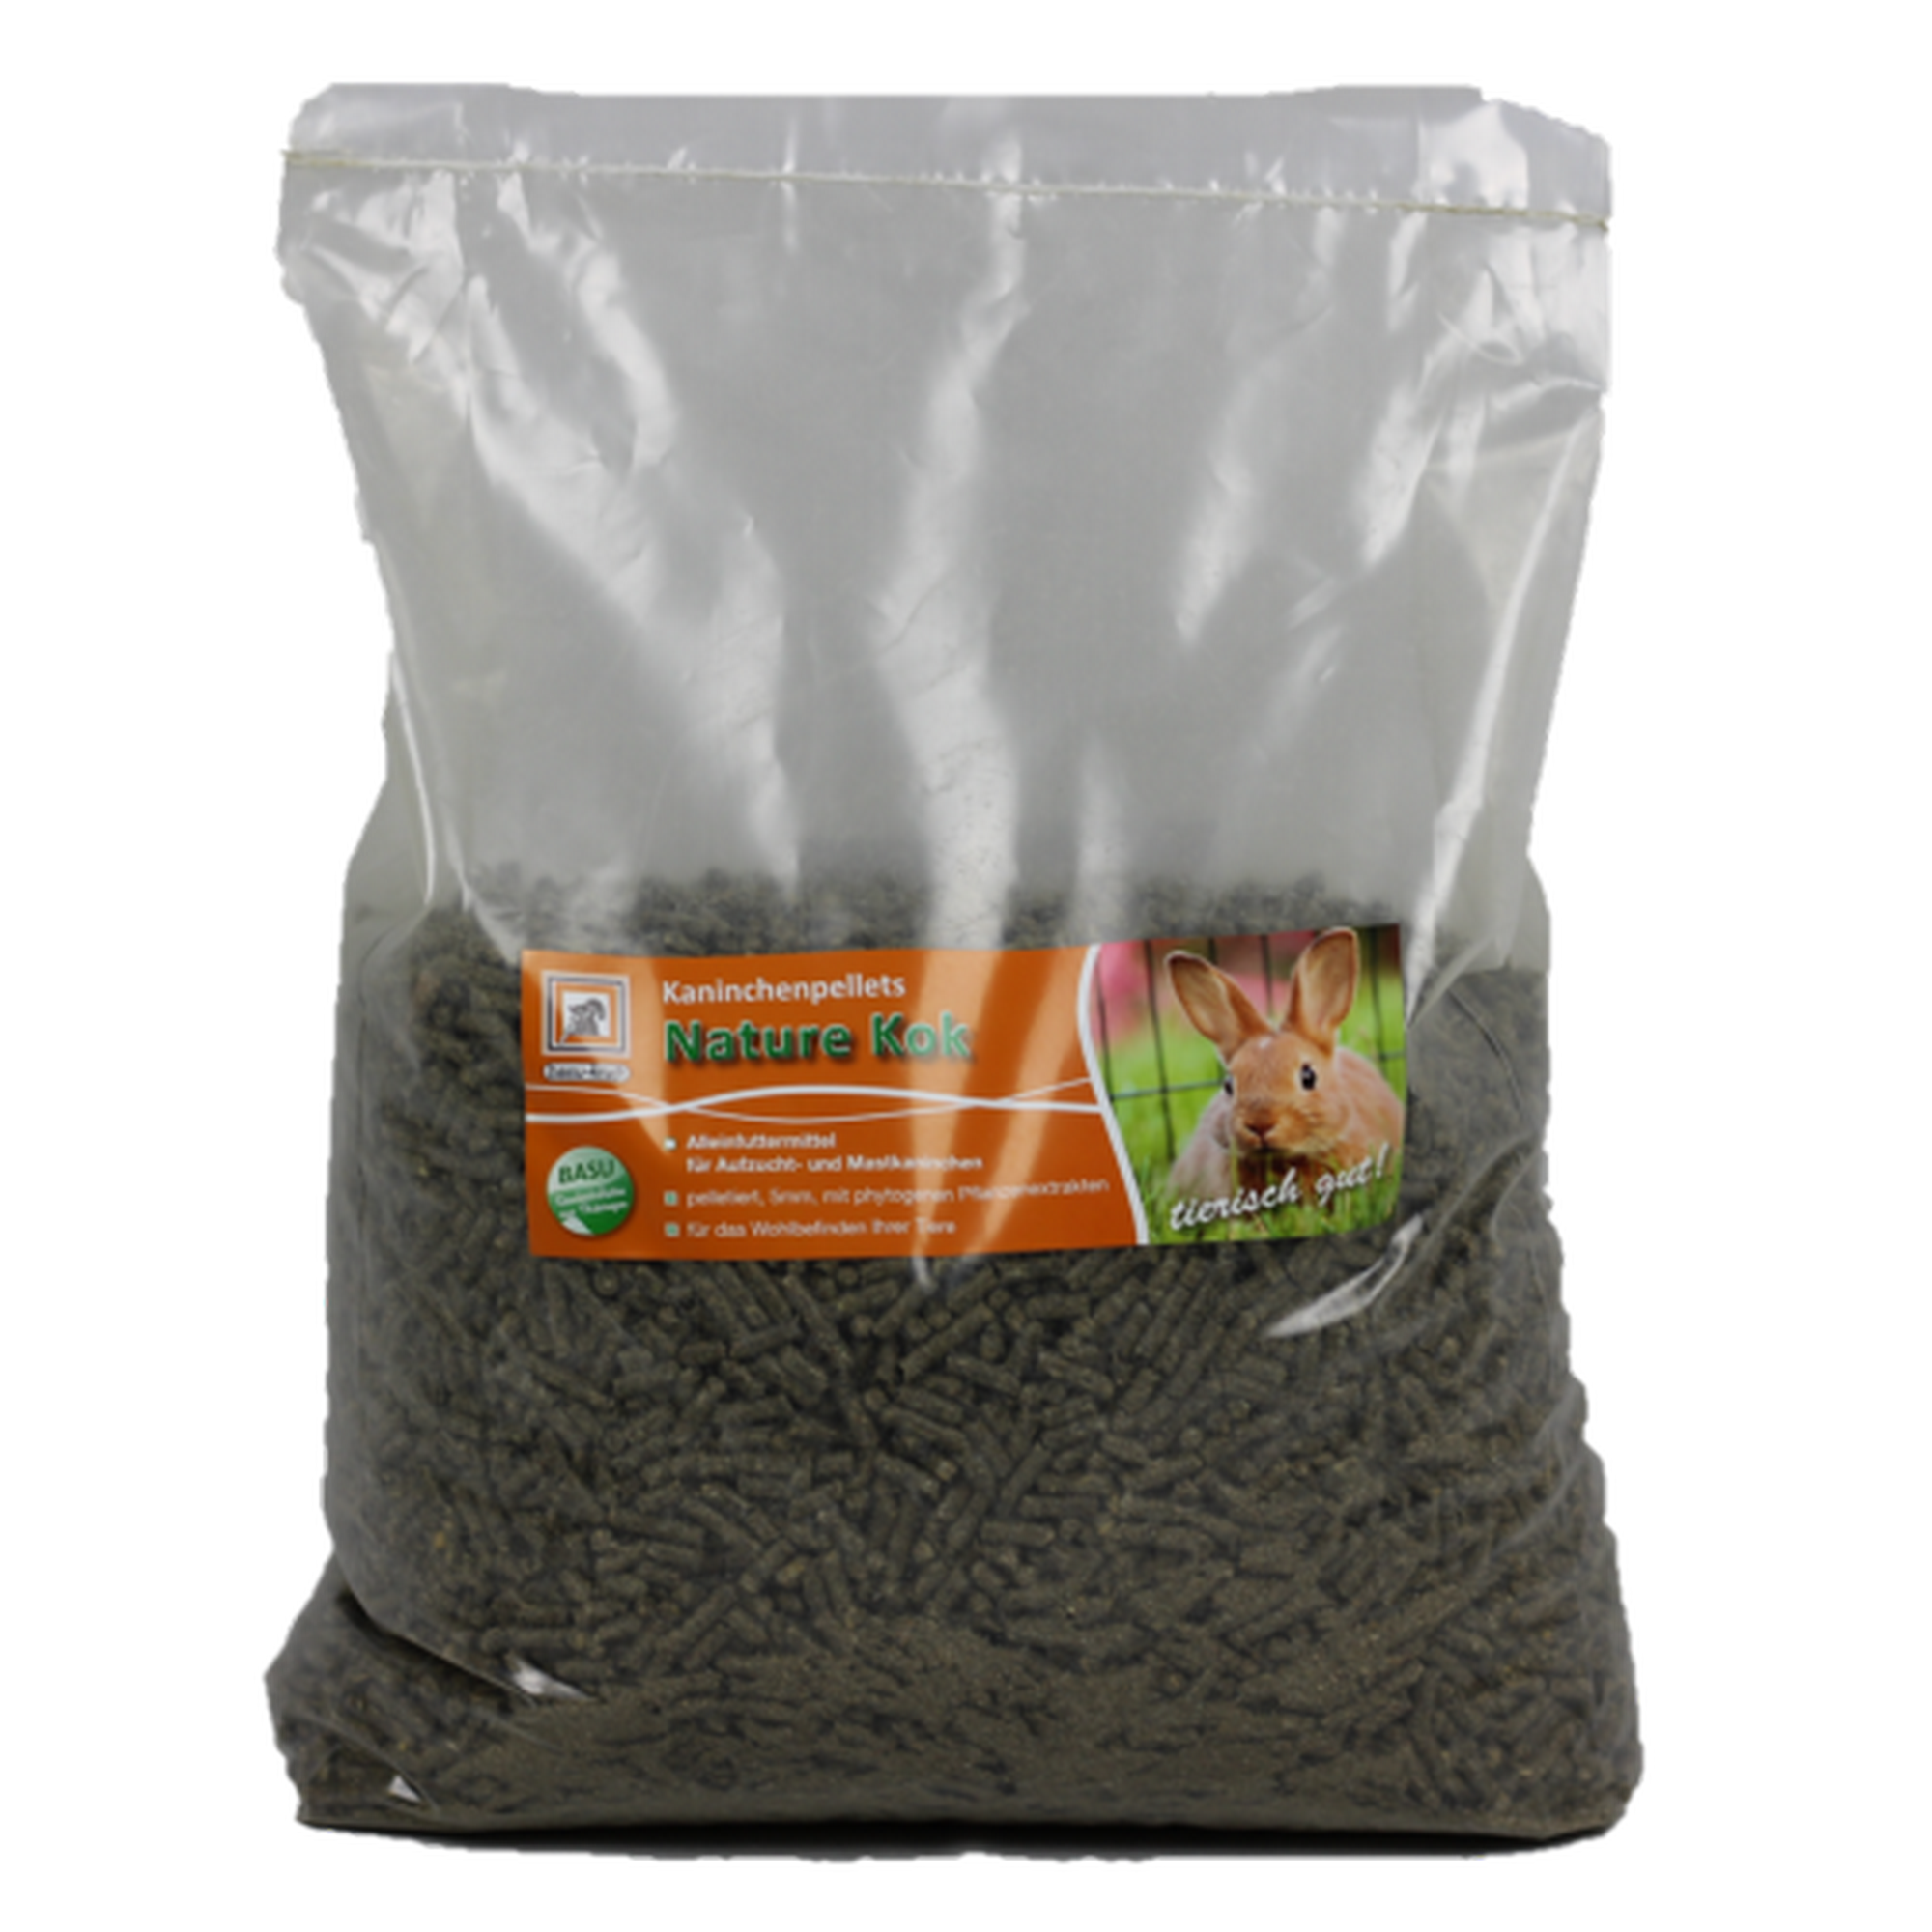 Kaninchenfutter 'Nature Kok' 7 Kg + product picture